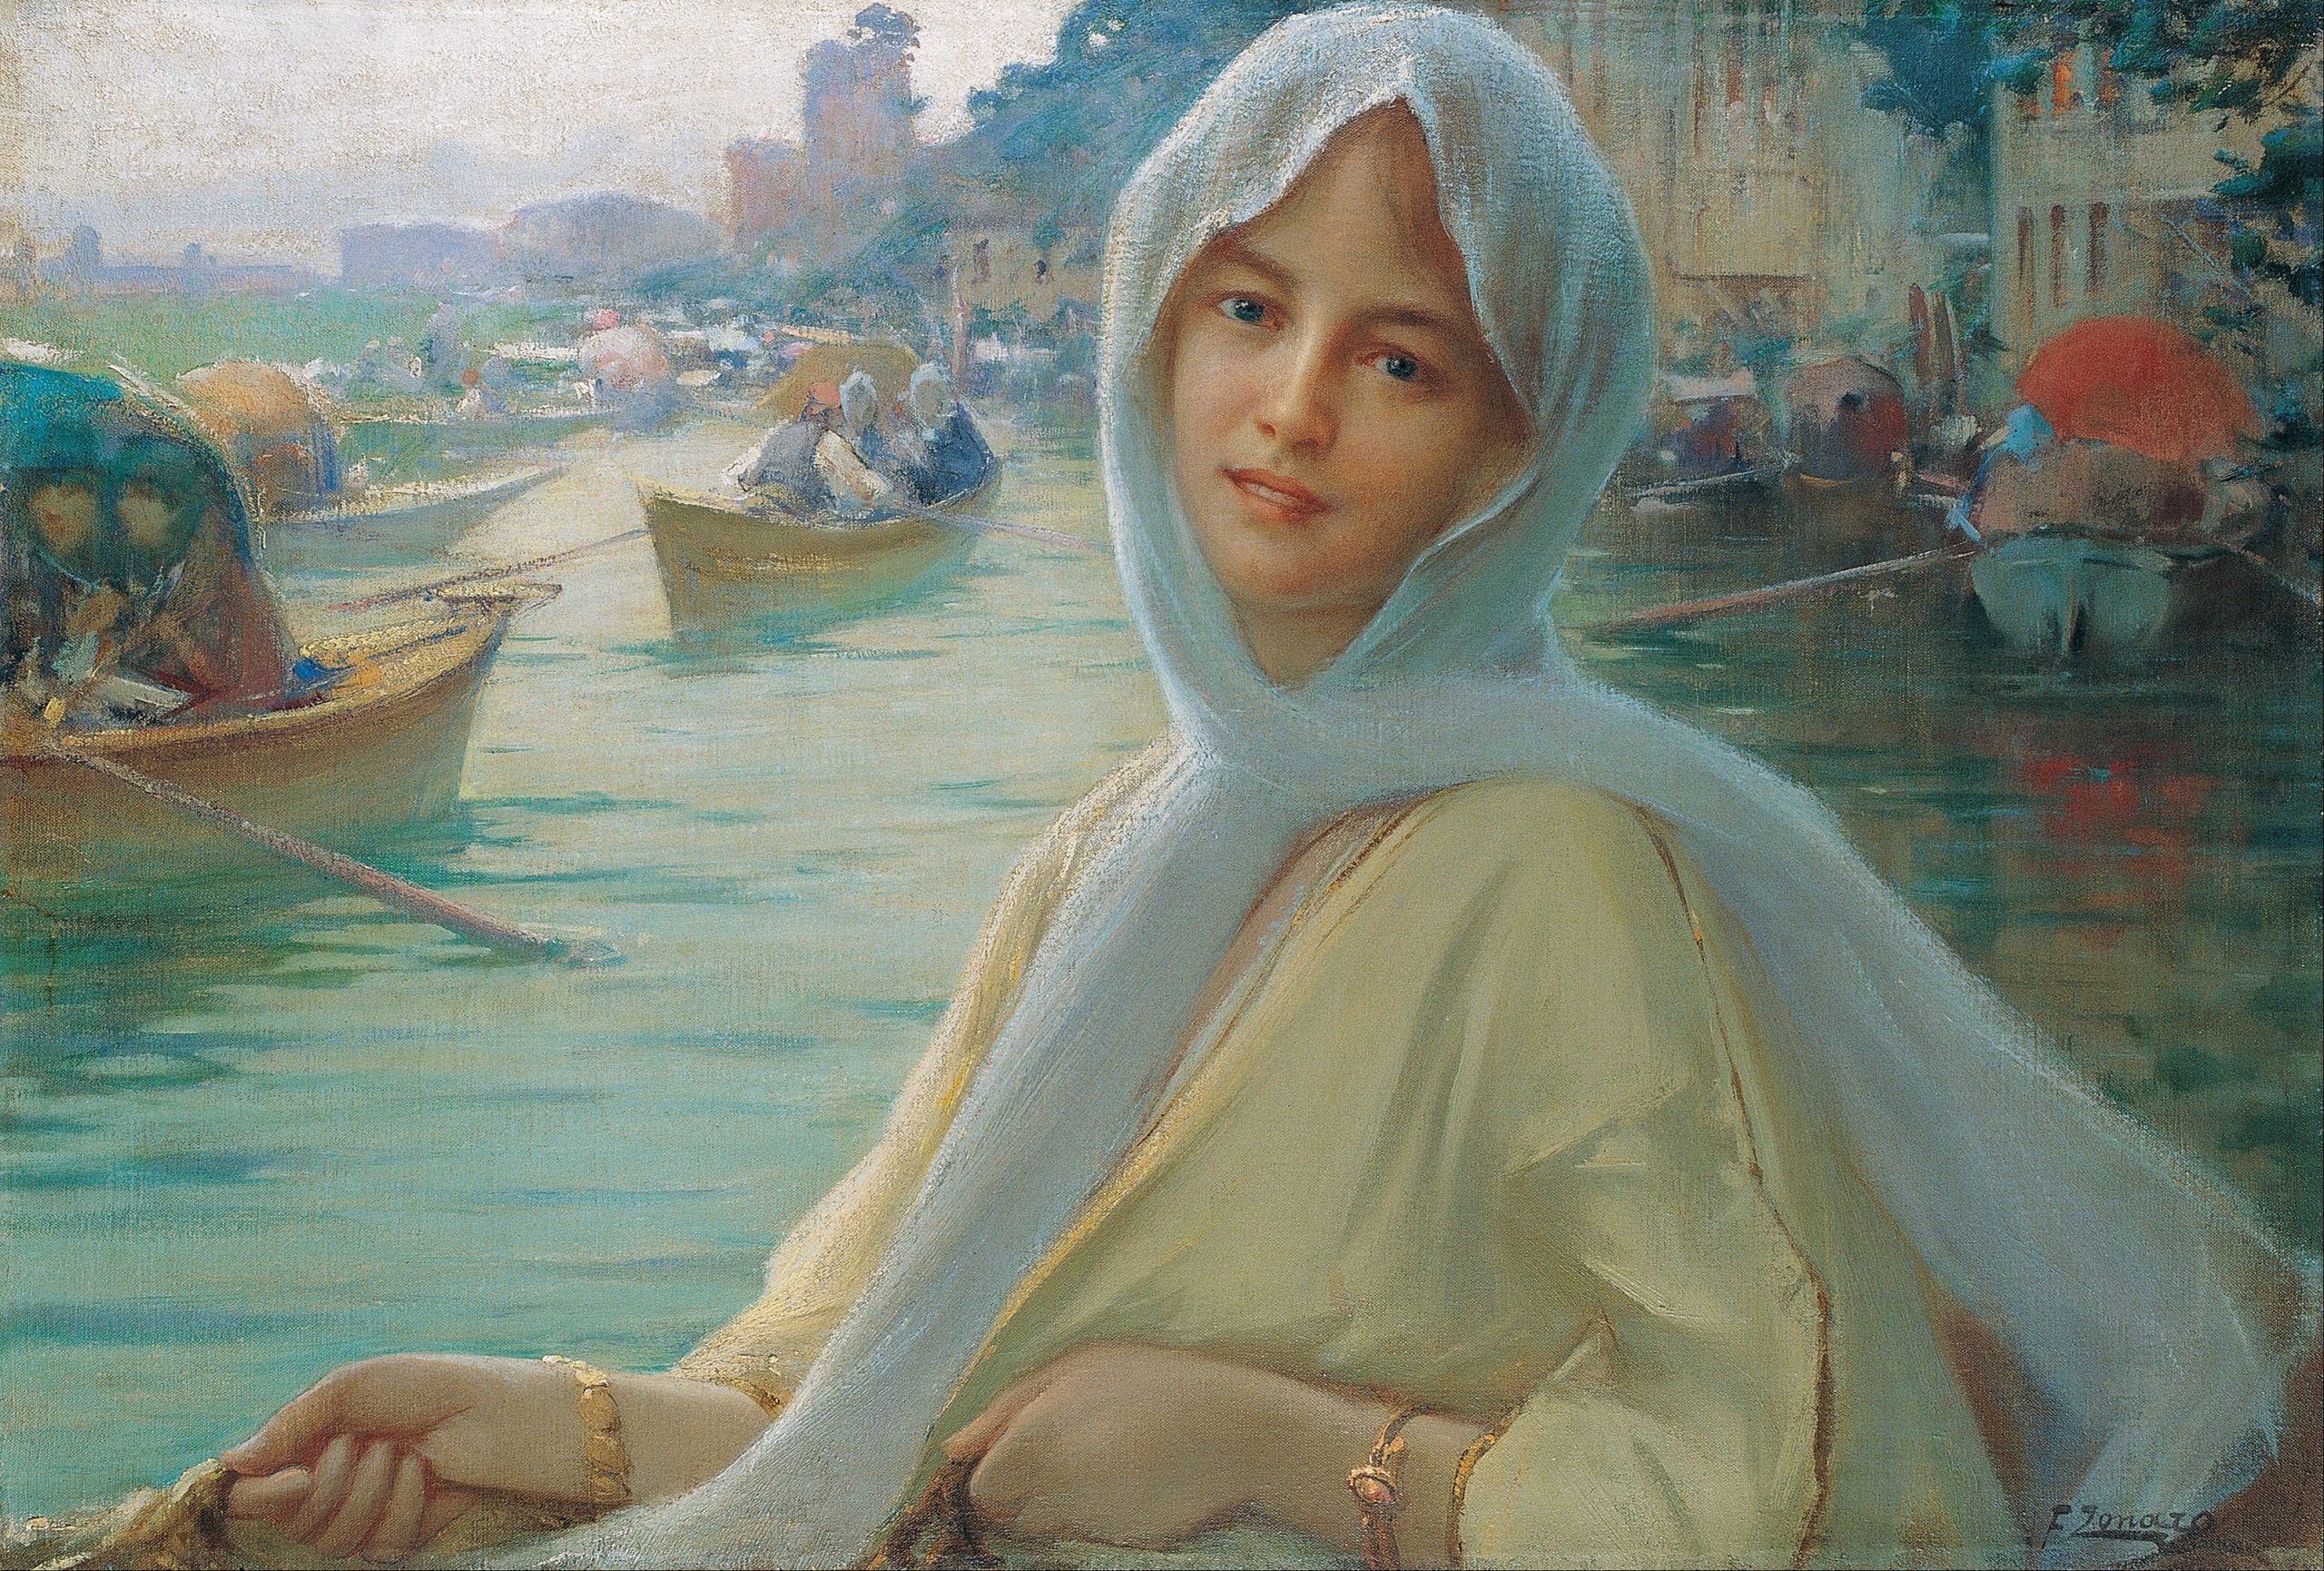 A young girl with a headscarf smiling back at the viewer with a view of a water canal in the background